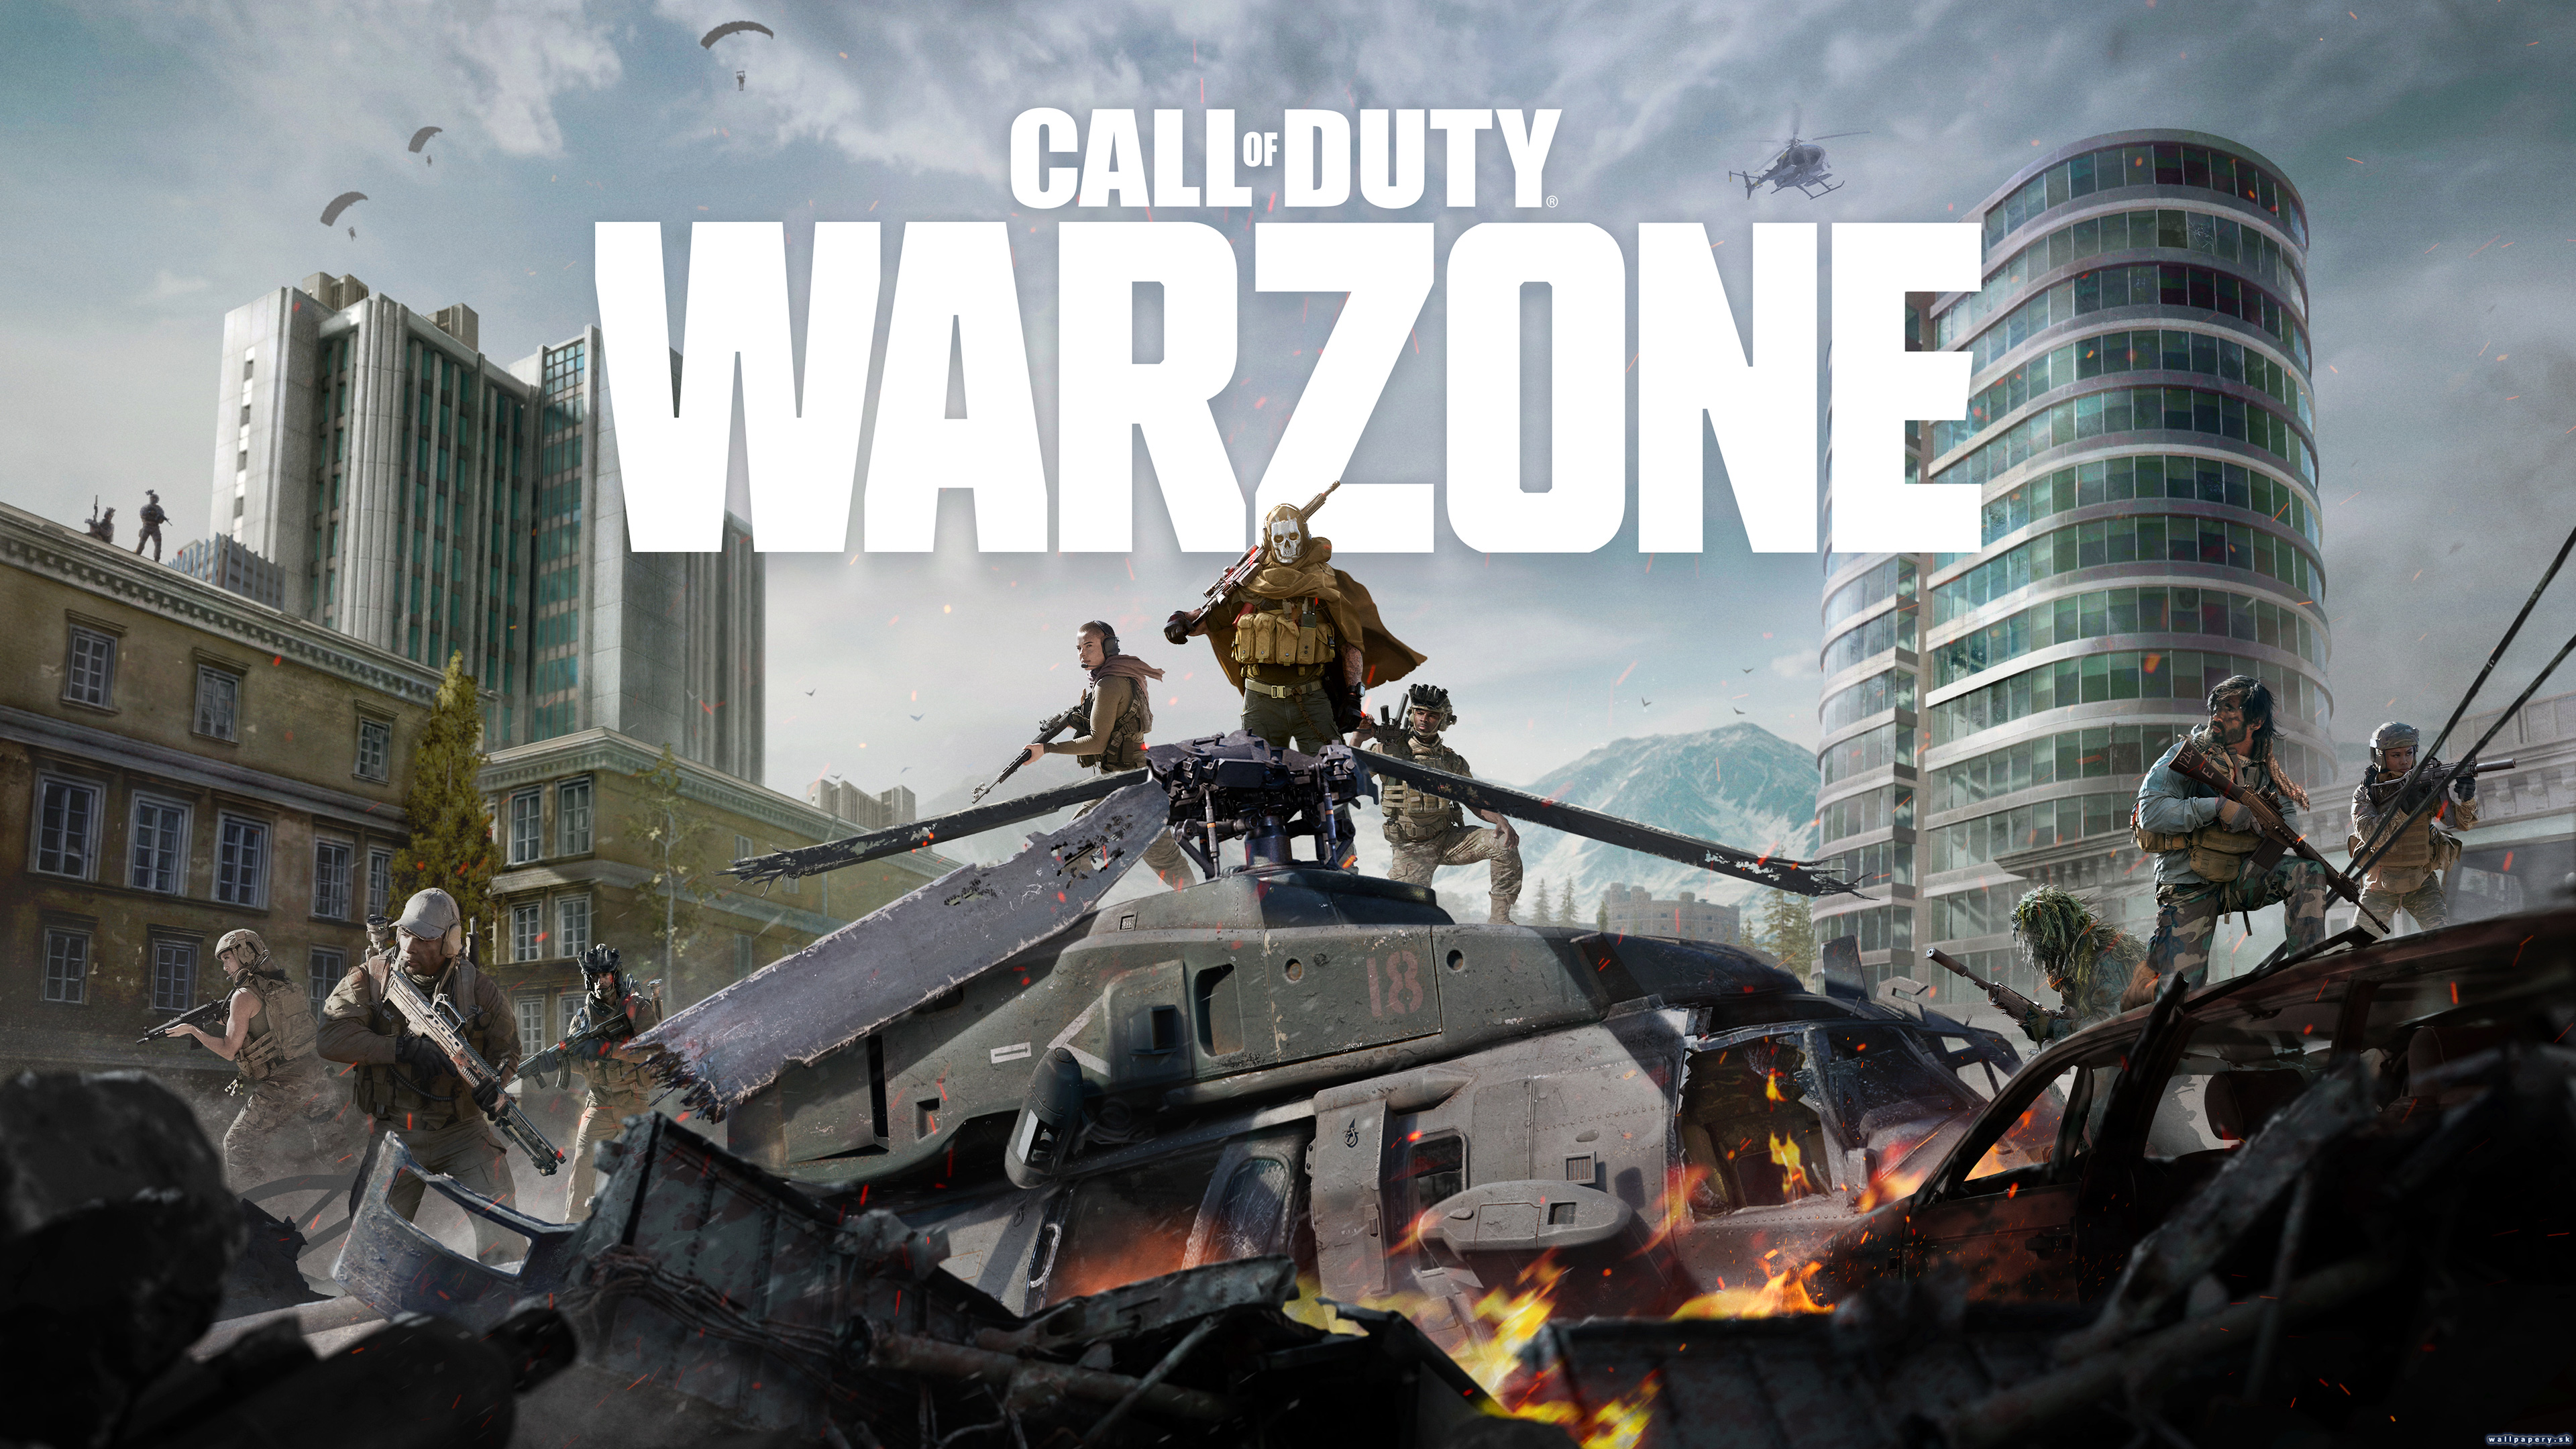 Call of Duty: Warzone - wallpaper 1